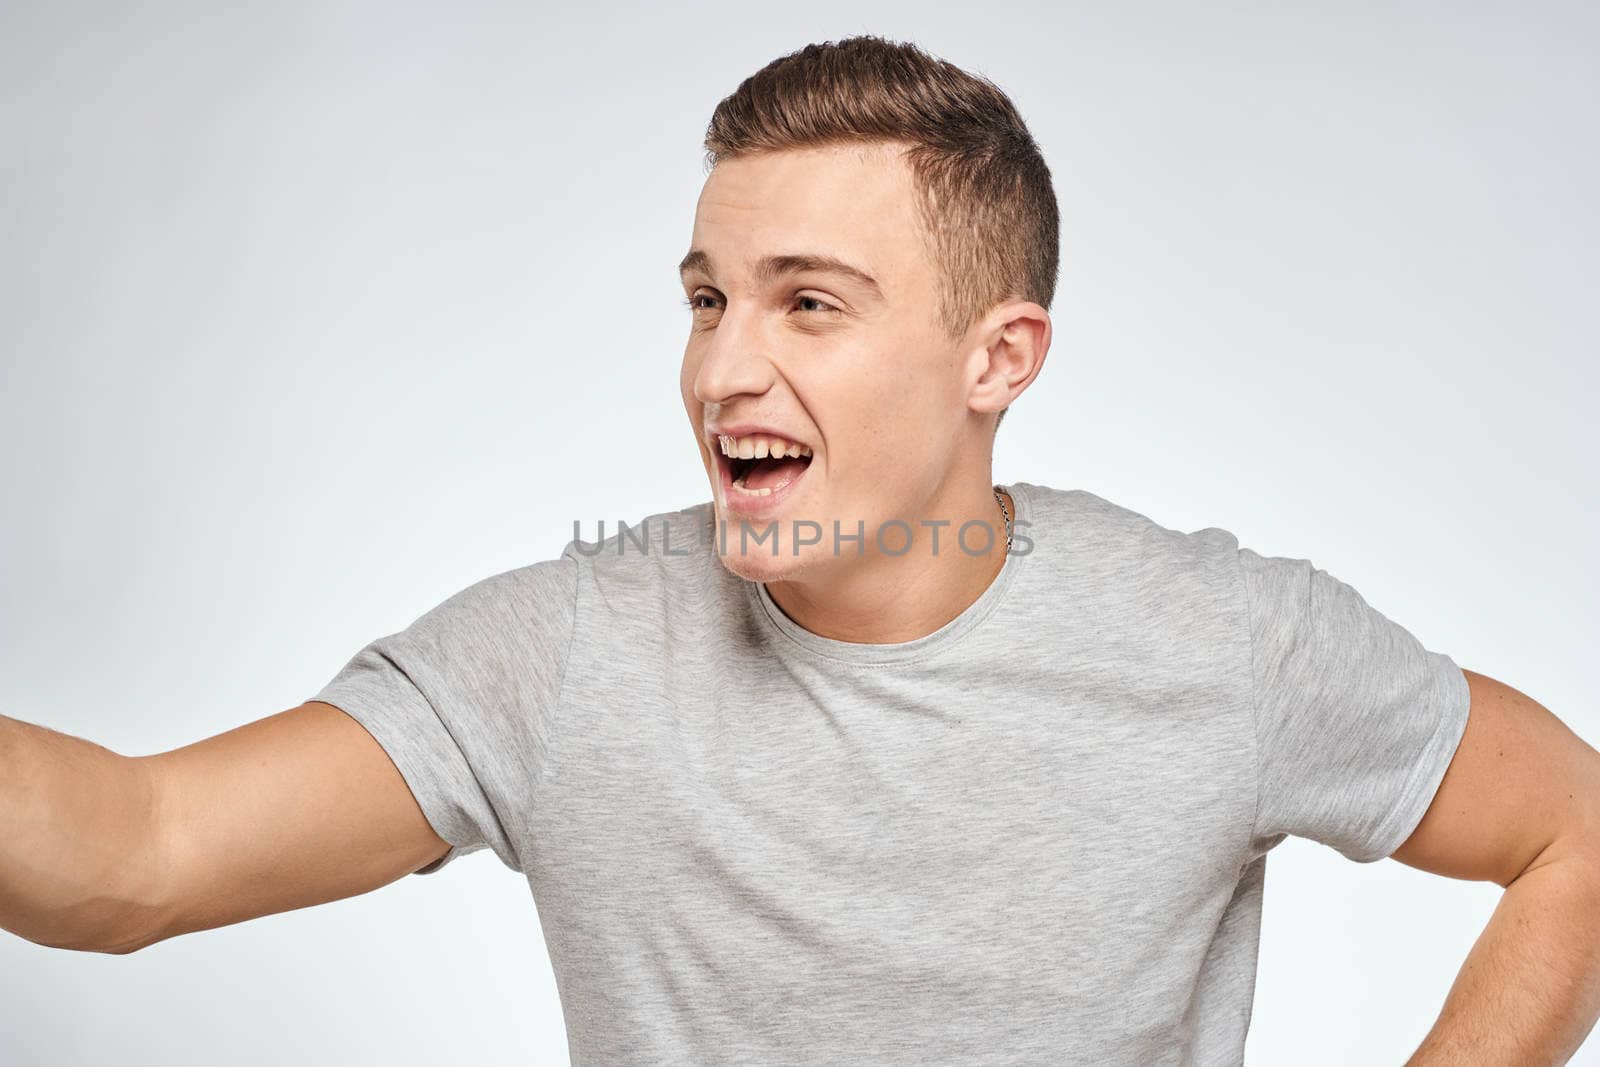 man in gray t-shirt emotions light background cropped view by SHOTPRIME